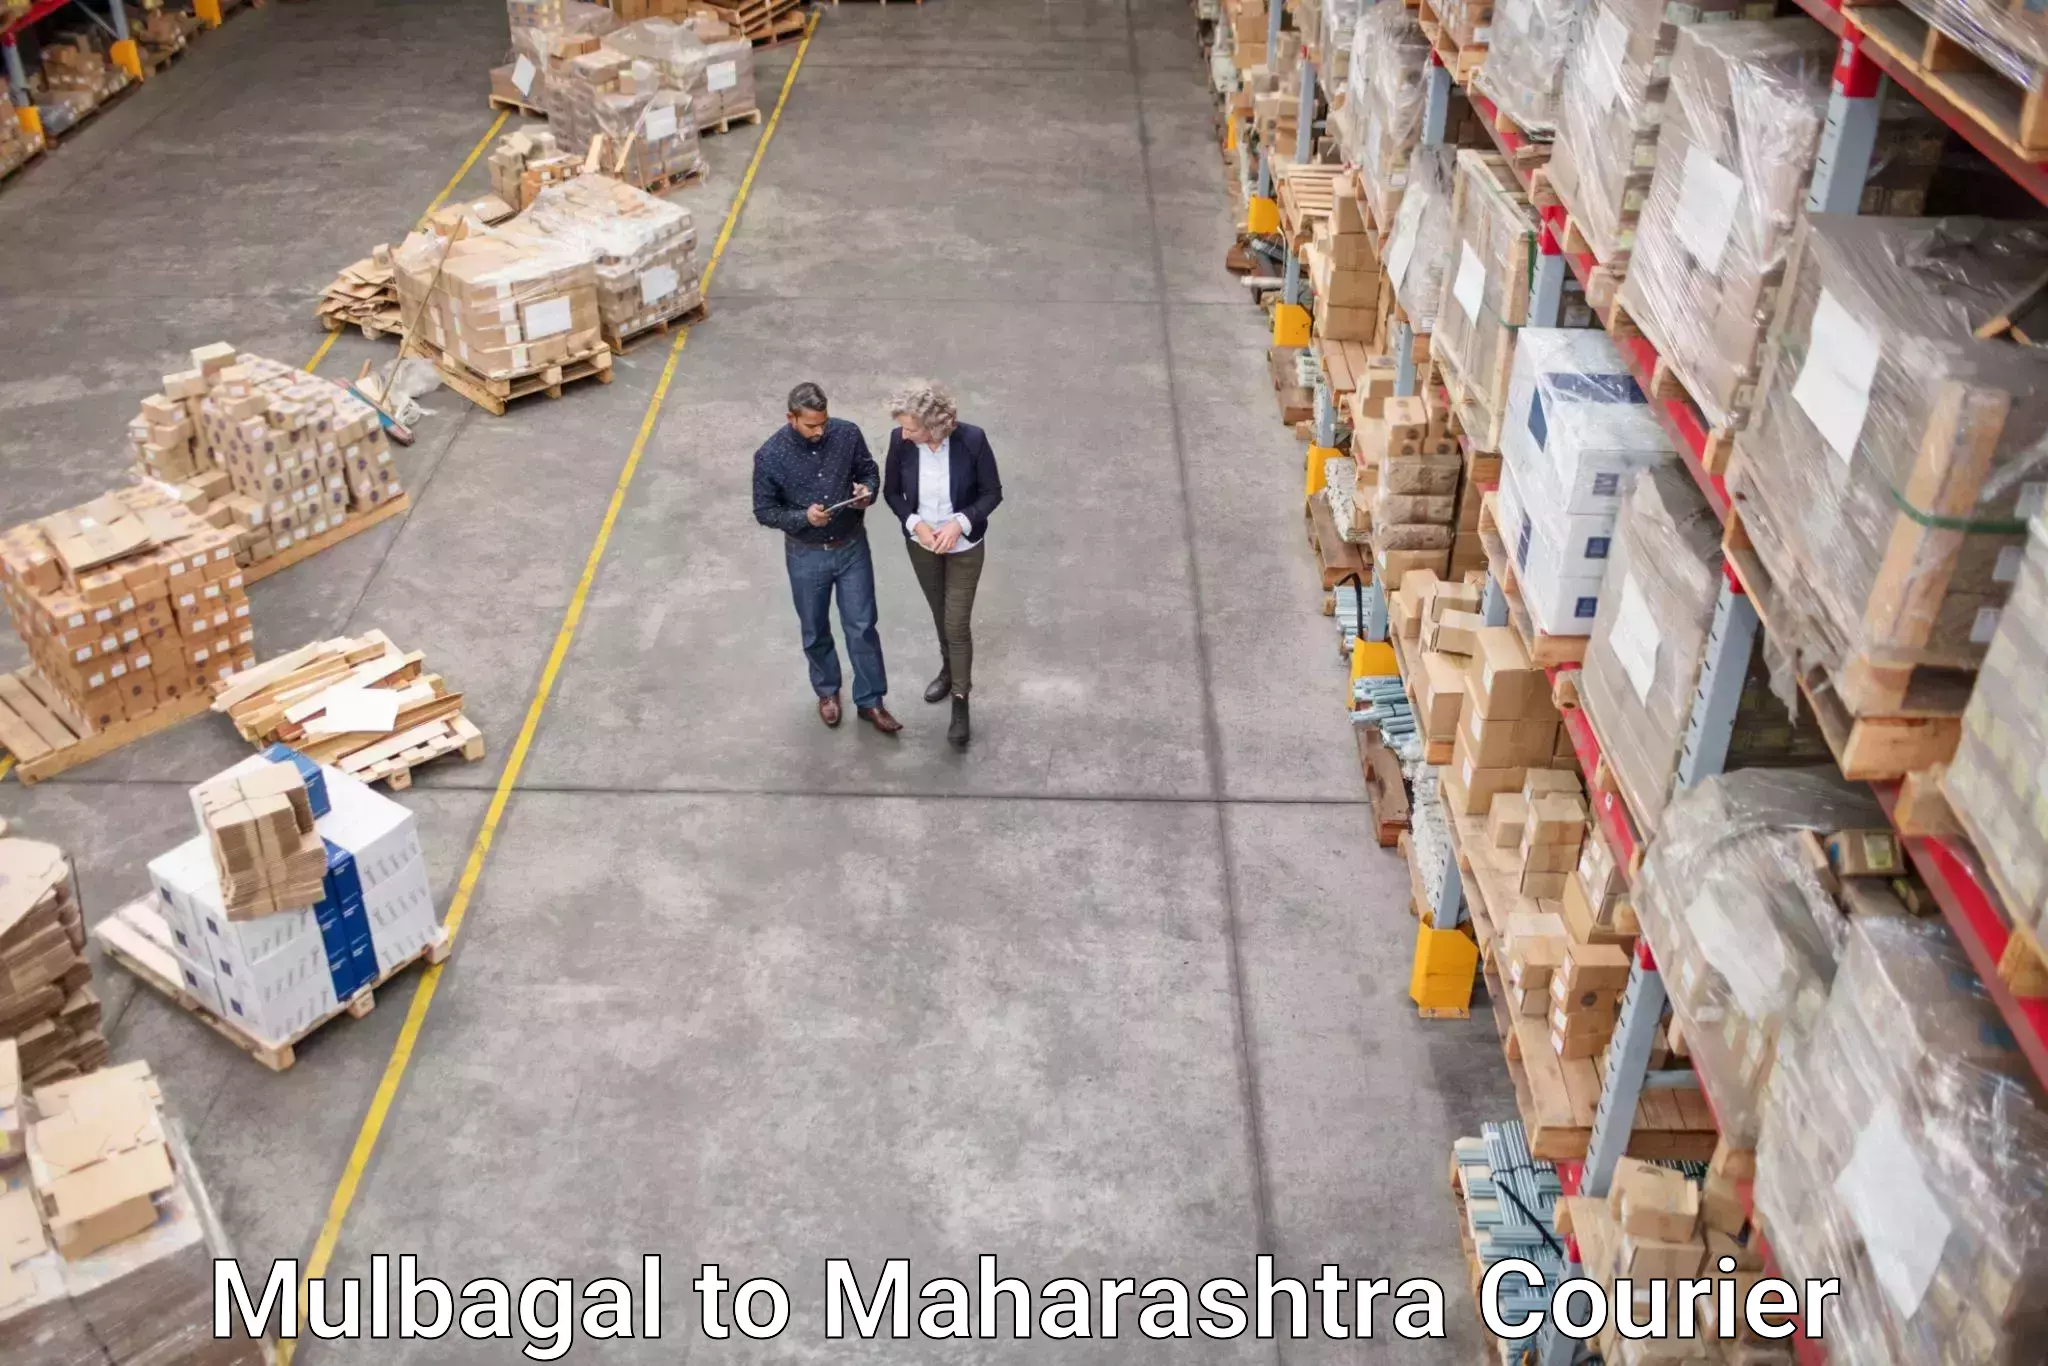 State-of-the-art courier technology Mulbagal to Maharashtra